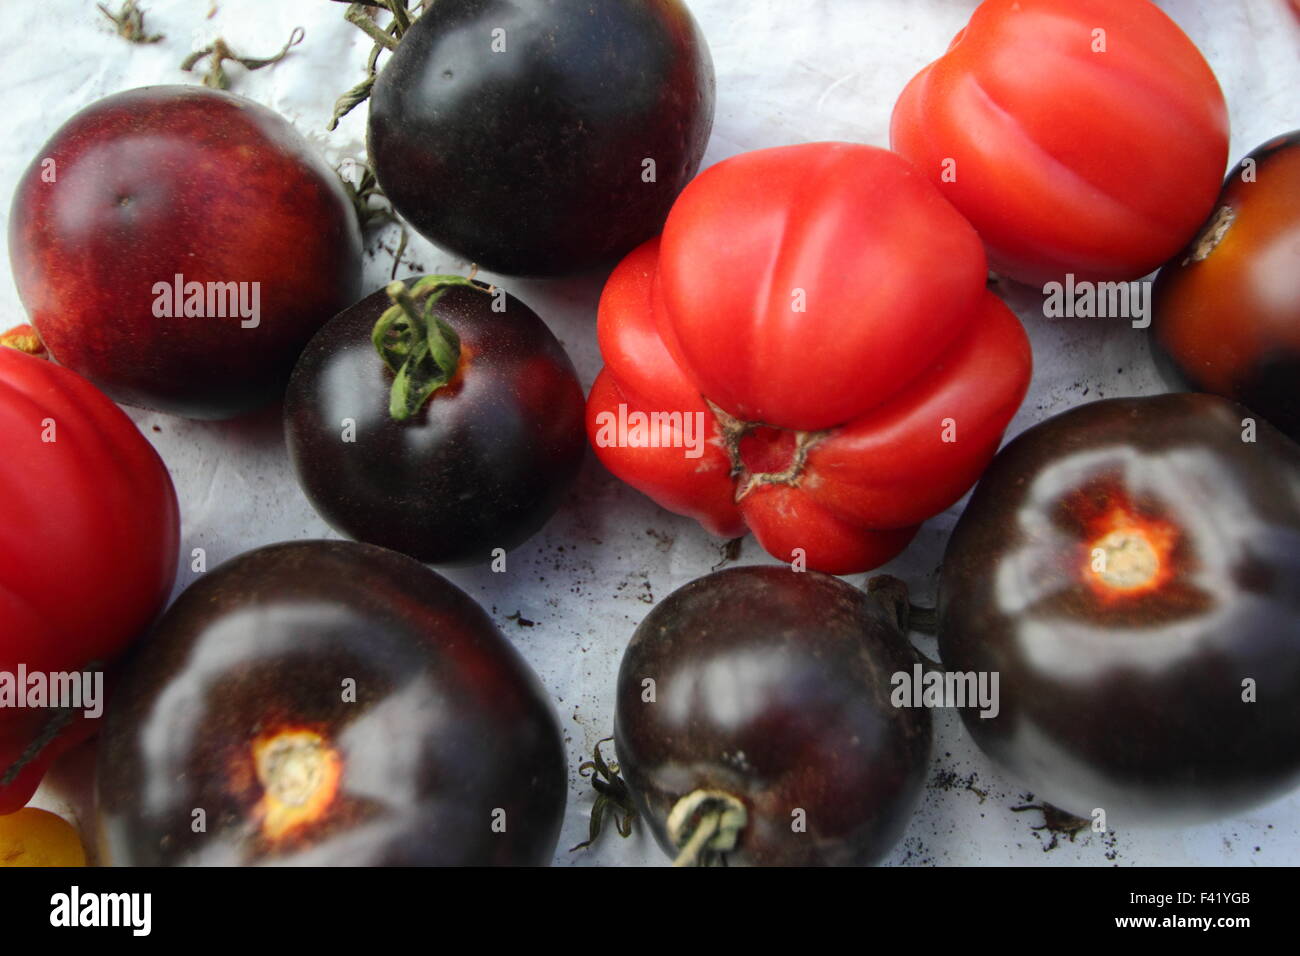 Solanum lycopersicum. A selection of red and black organically grown heritage tomatoes ripening on a windowsill, England UK Stock Photo